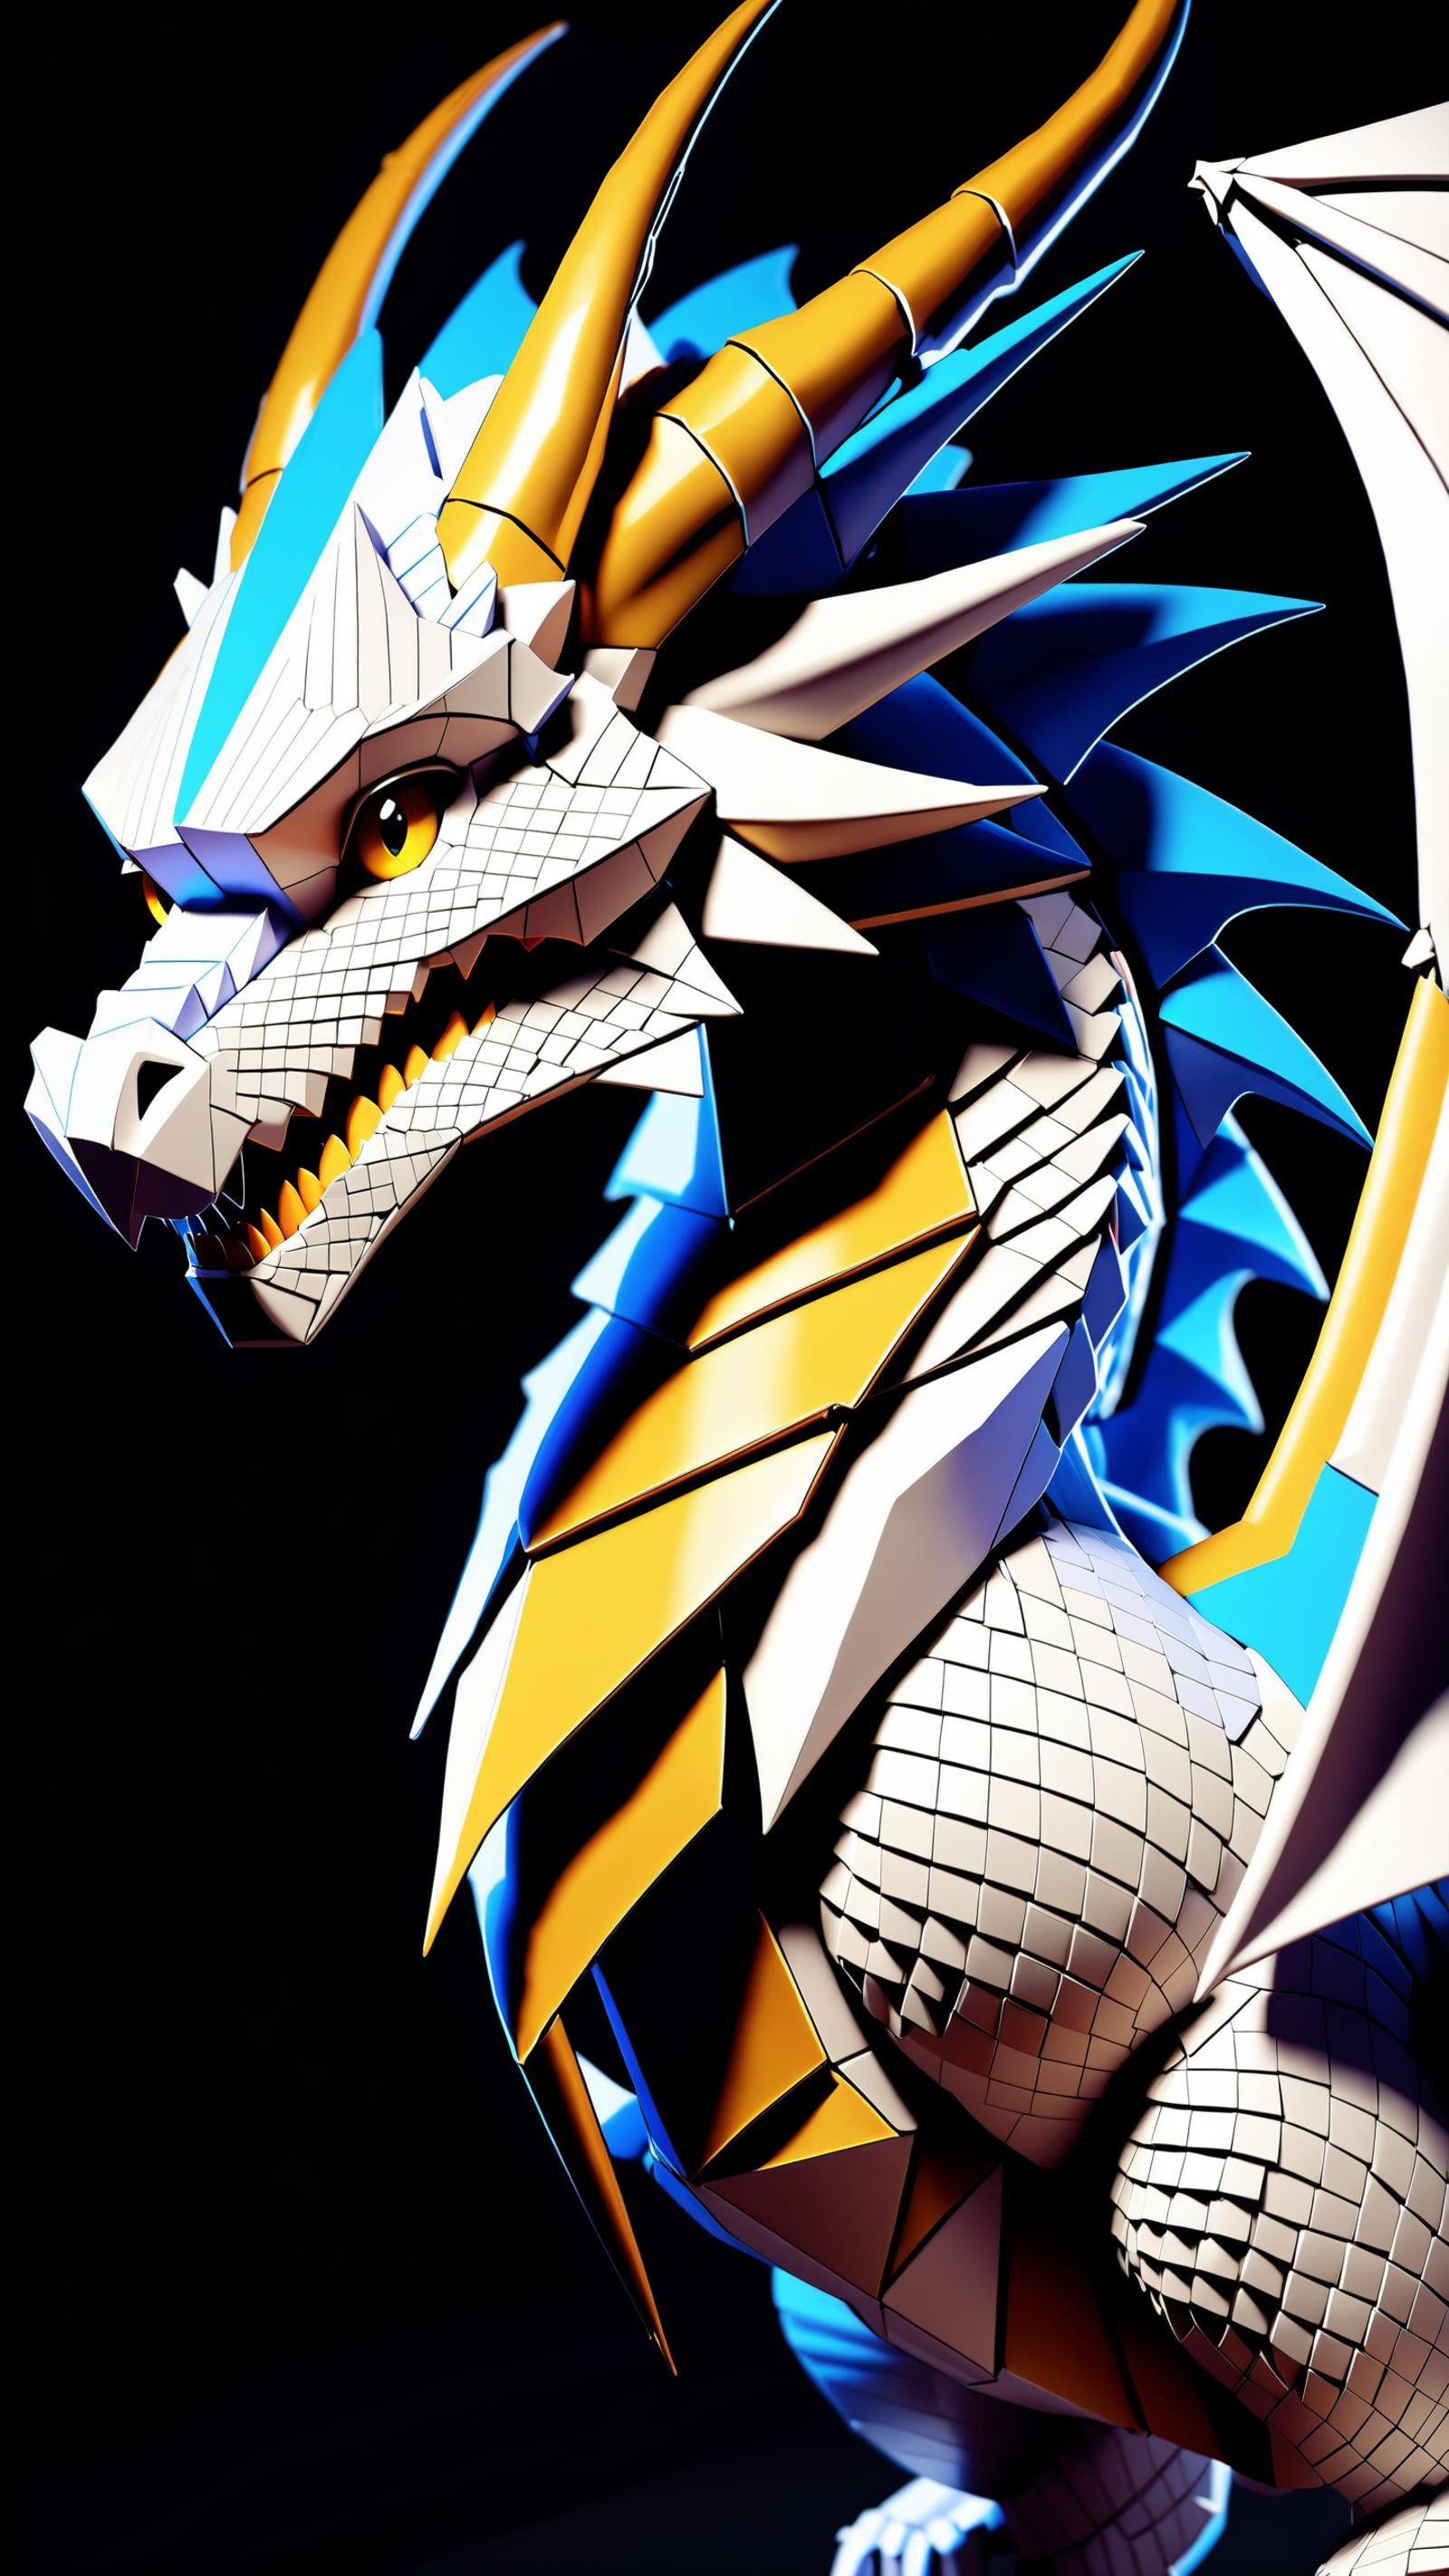 3D Dragon Model with Blue and Yellow Scales.